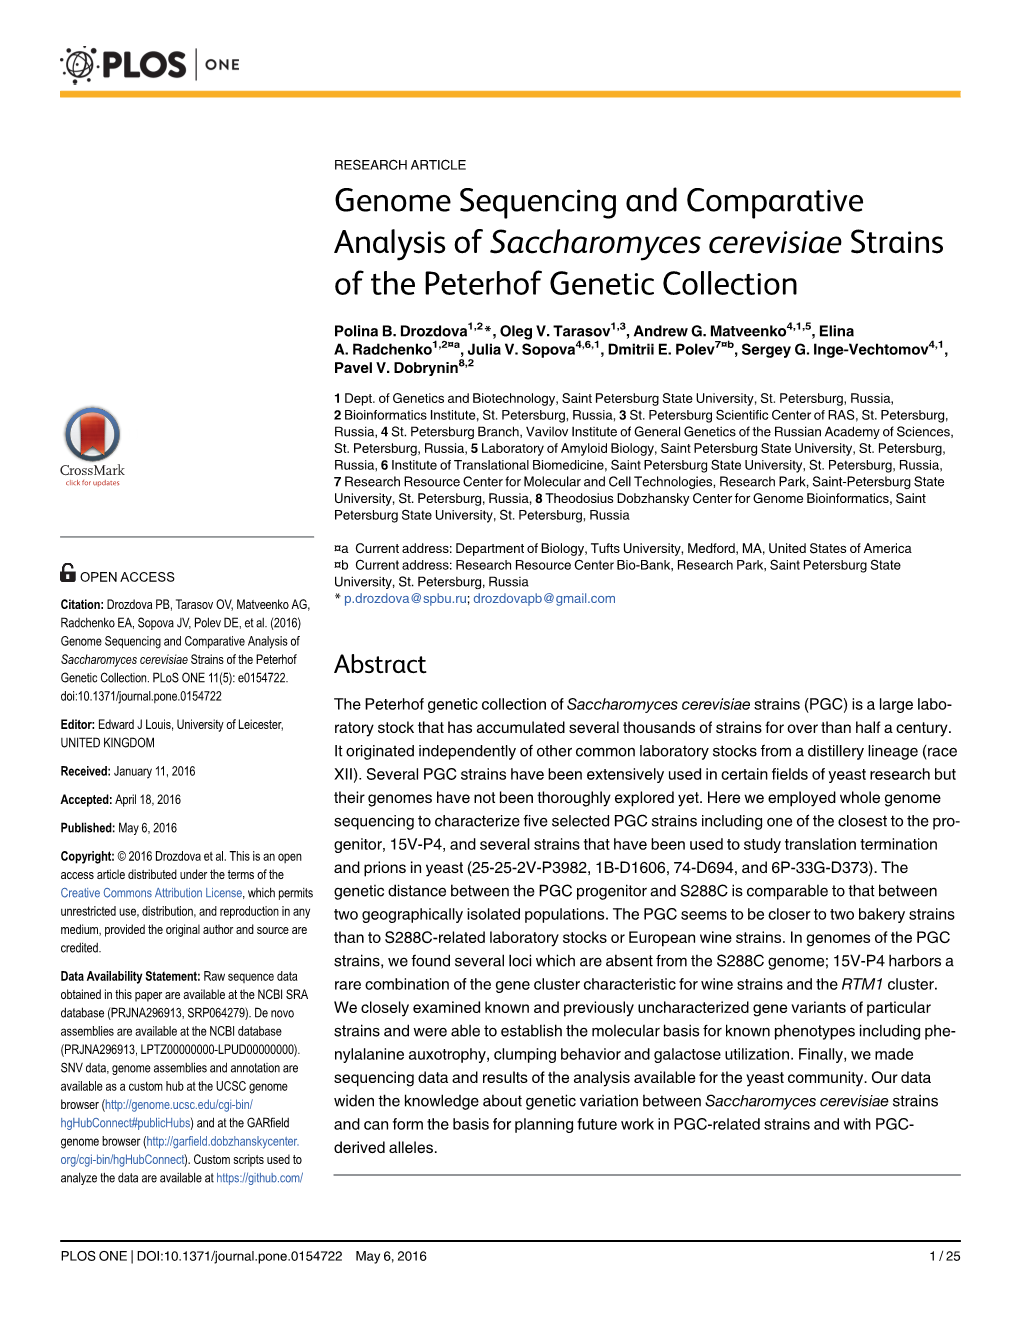 Genome Sequencing and Comparative Analysis of Saccharomyces Cerevisiae Strains of the Peterhof Genetic Collection